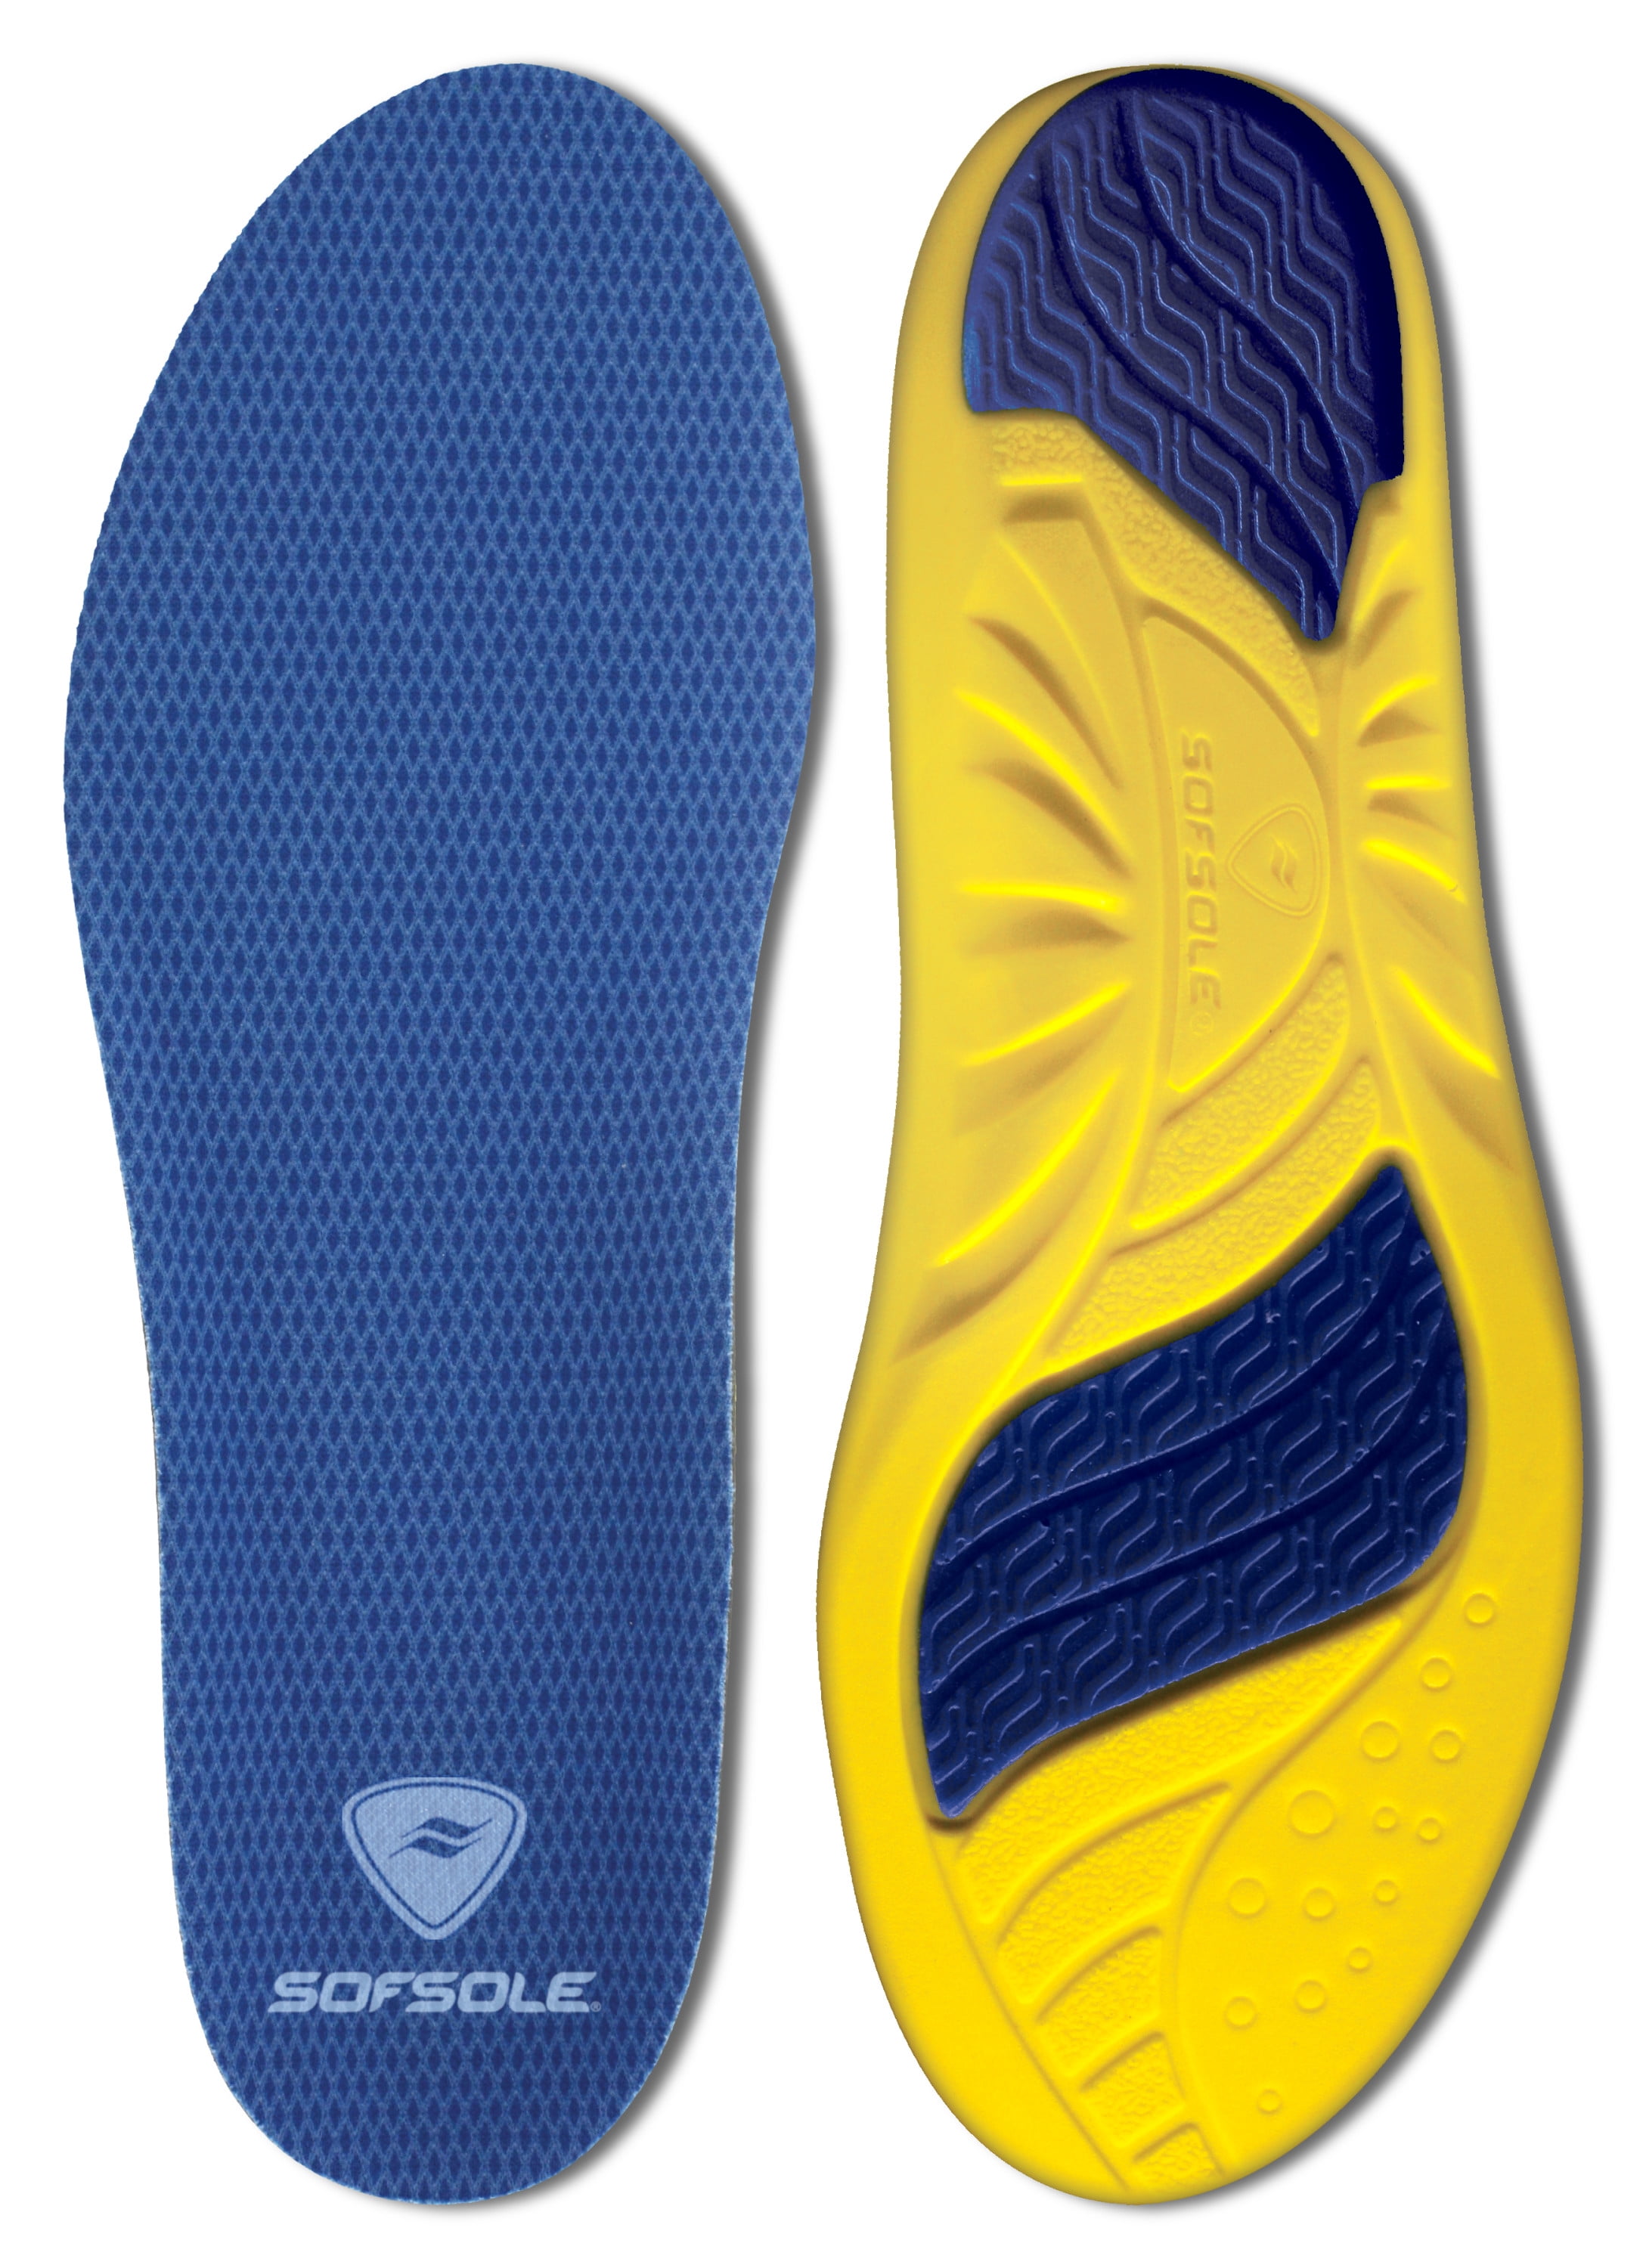 size 15 insoles